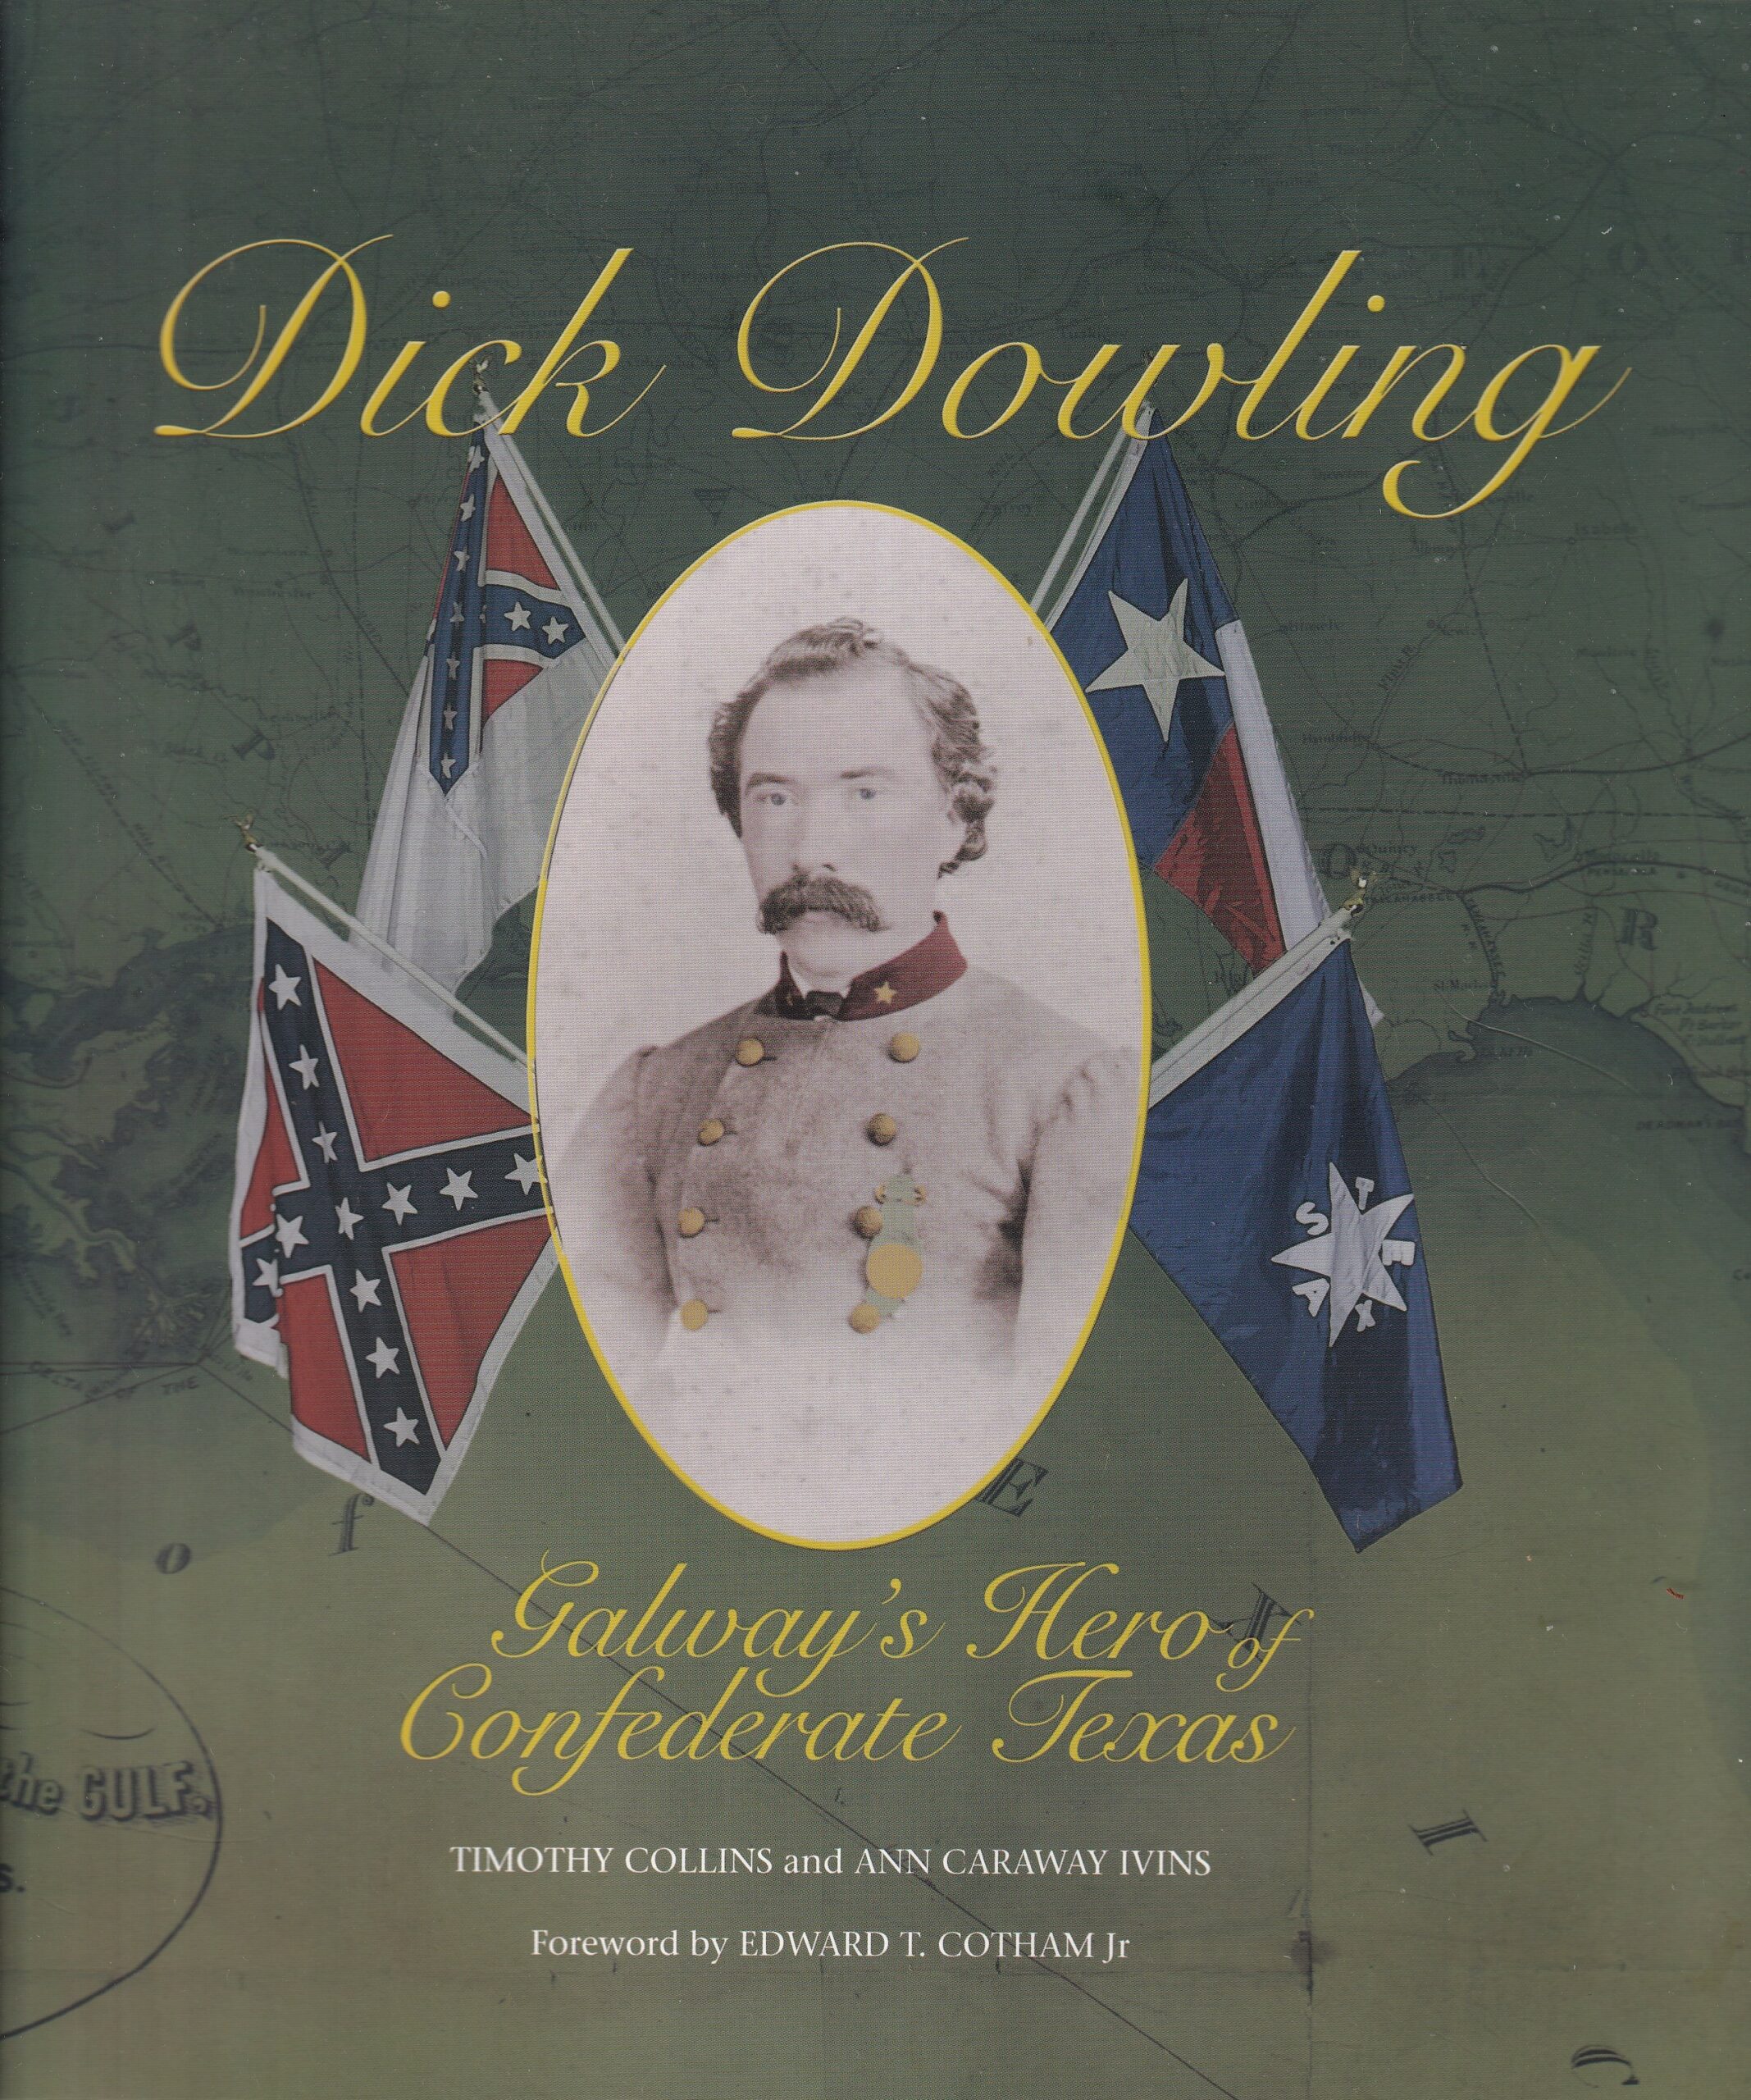 Dick Dowling: Galway’s Hero of Confederate Texas by Timothy Collins and Ann Caraway Ivins